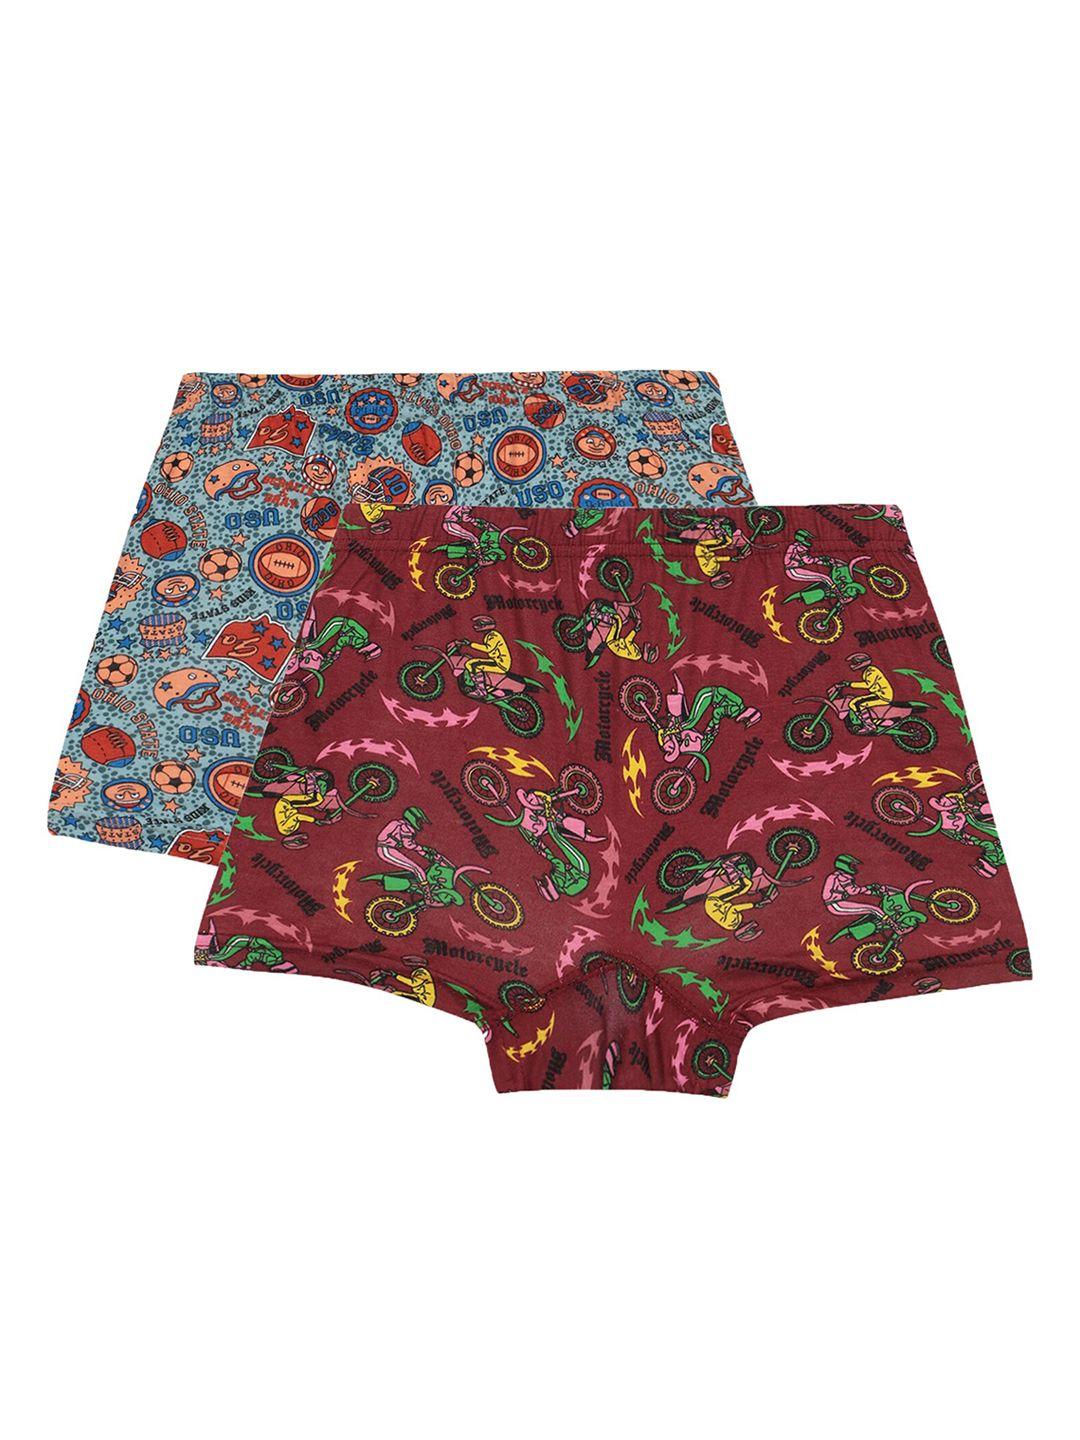 Bodycare Kids Boys Pack Of 2 Printed Cotton Trunks